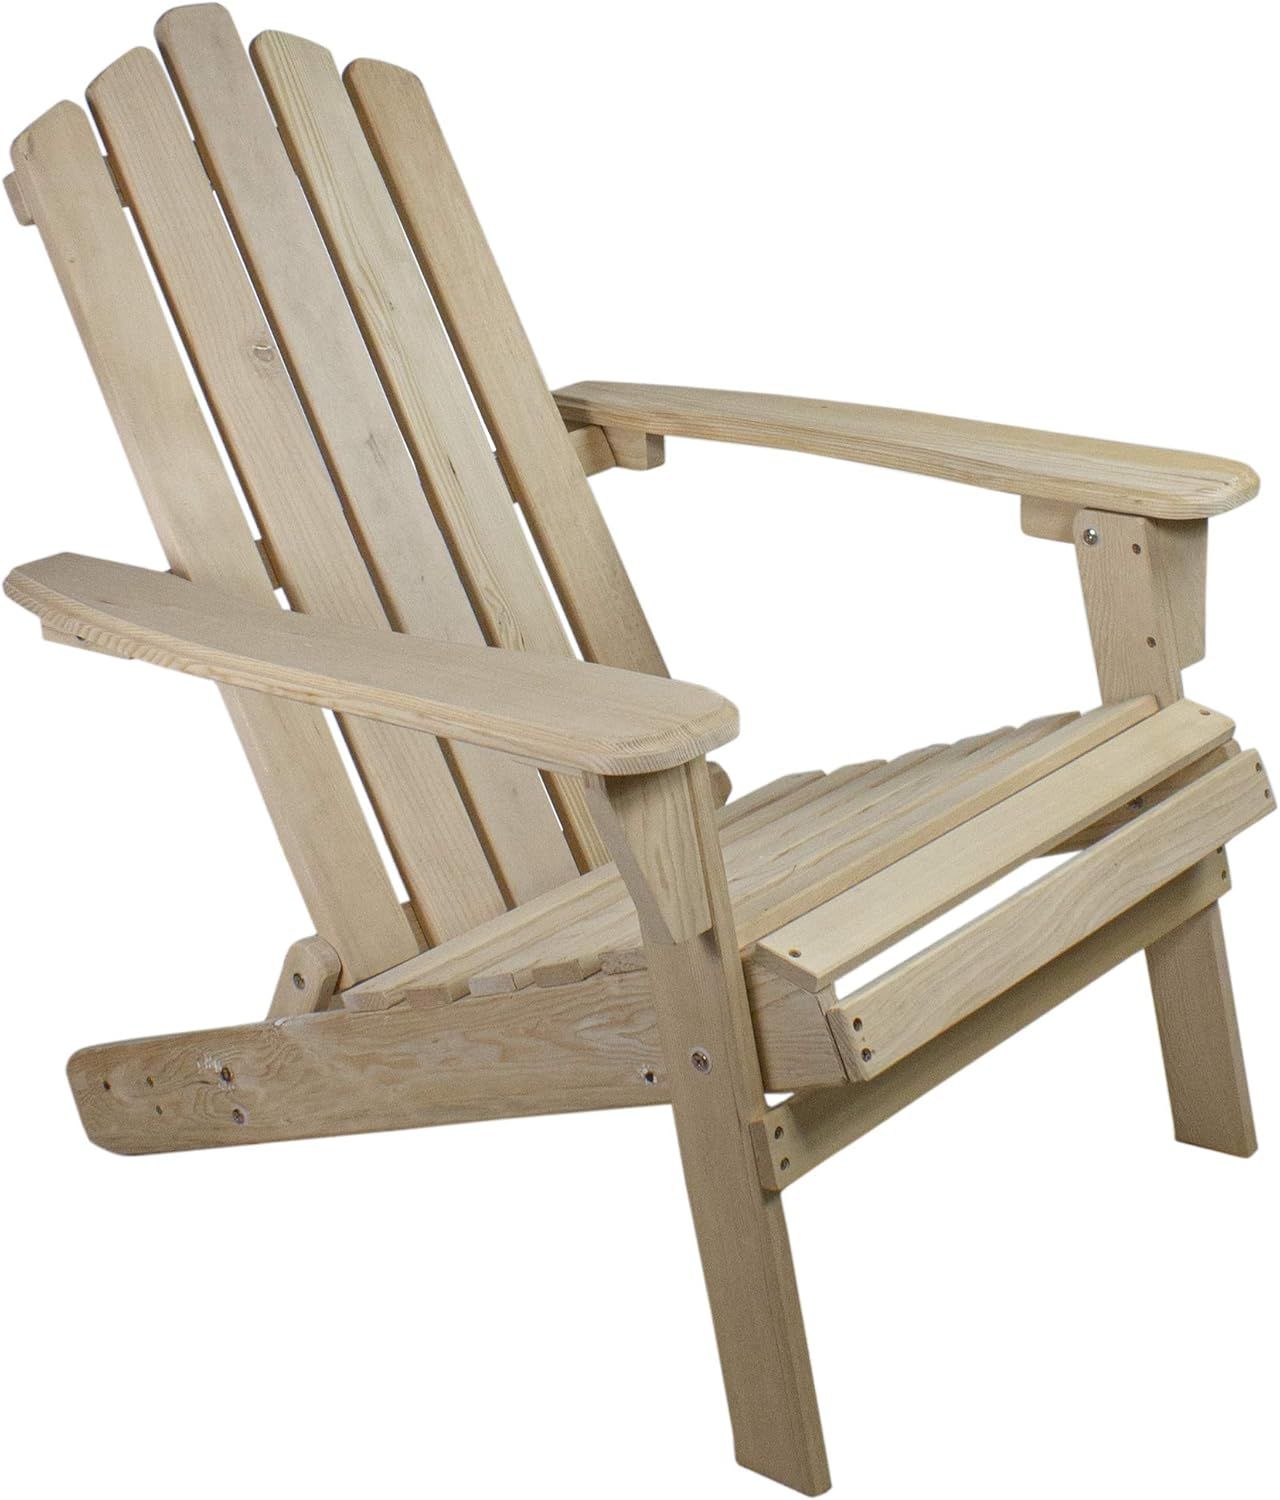 Northlight DR29841 Natural Classic Folding Wooden Adirondack Chair, 36", Brown | Amazon (US)